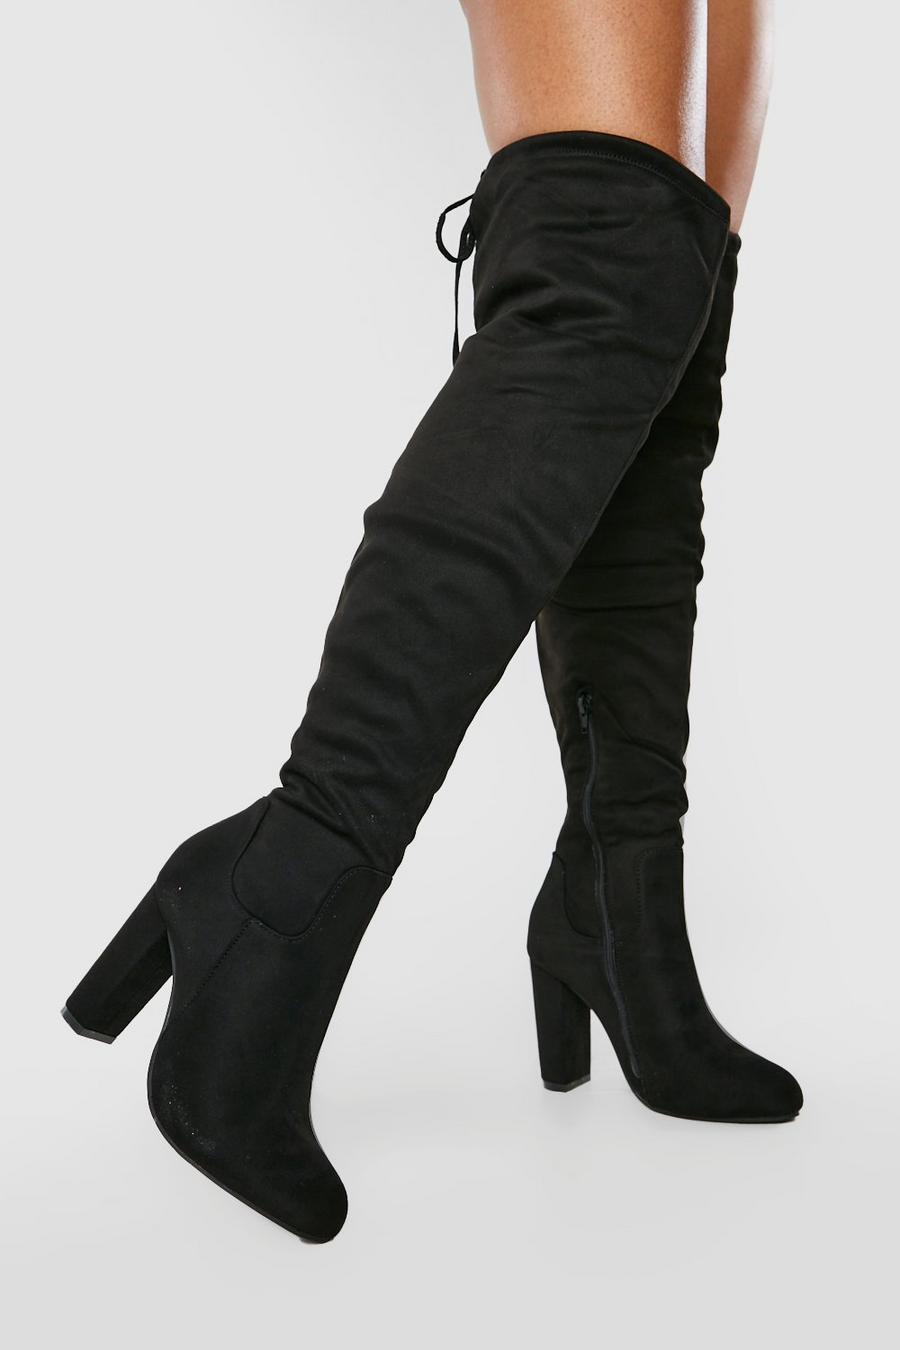 Black Over The Knee Tie Back Padded Boots